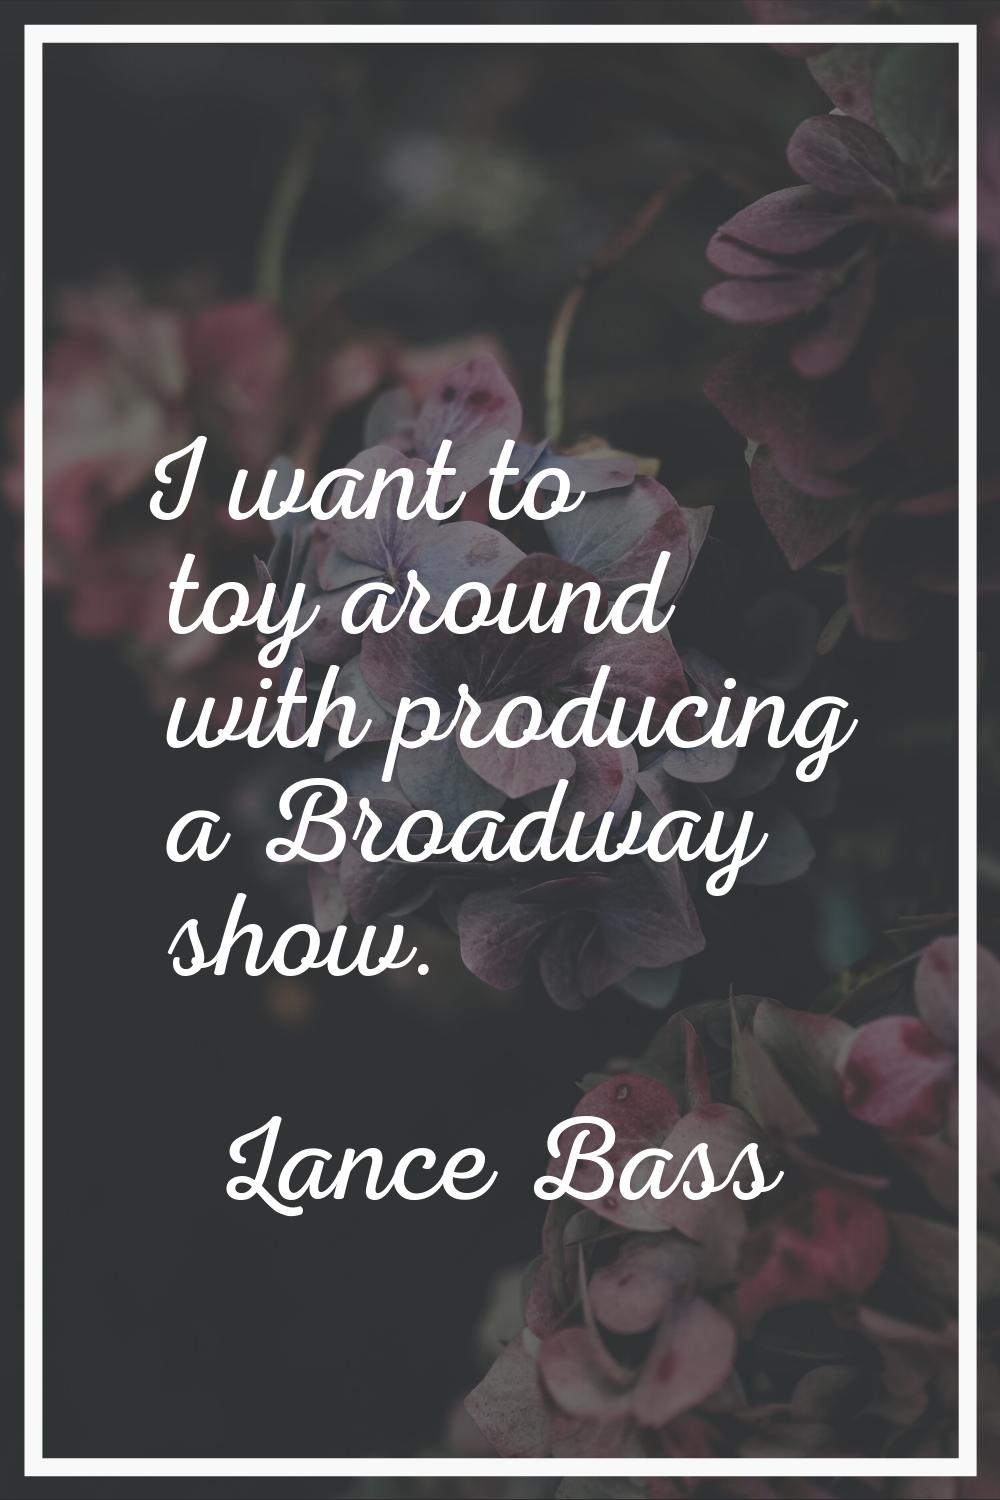 I want to toy around with producing a Broadway show.